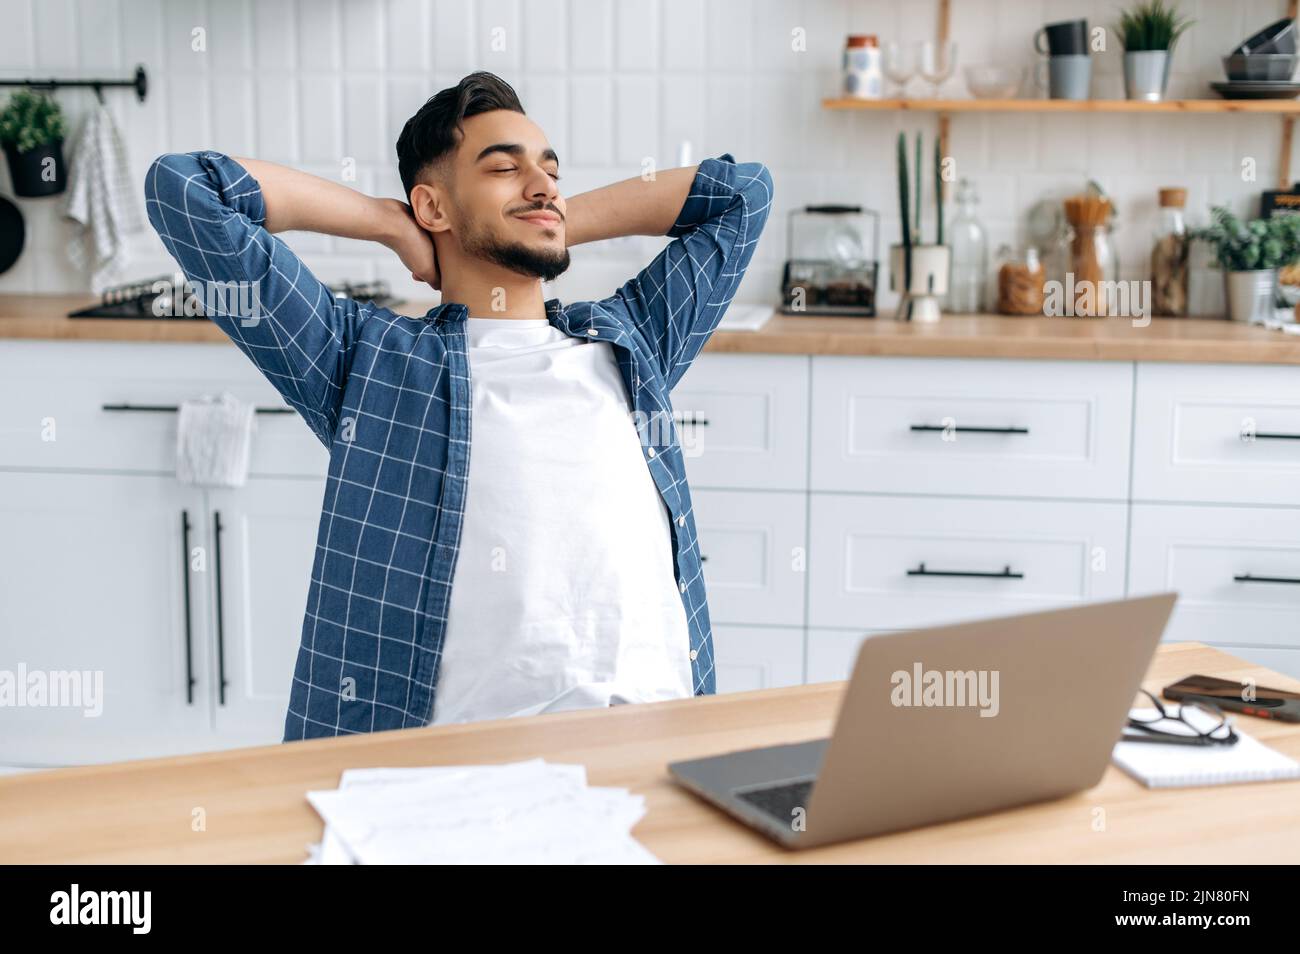 Relaxed calm arabian or indian guy, freelancer, works from home, sits in the kitchen at the workplace, takes a break from work, puts his hands behind his head, closed his eyes, dreams of rest, smile Stock Photo